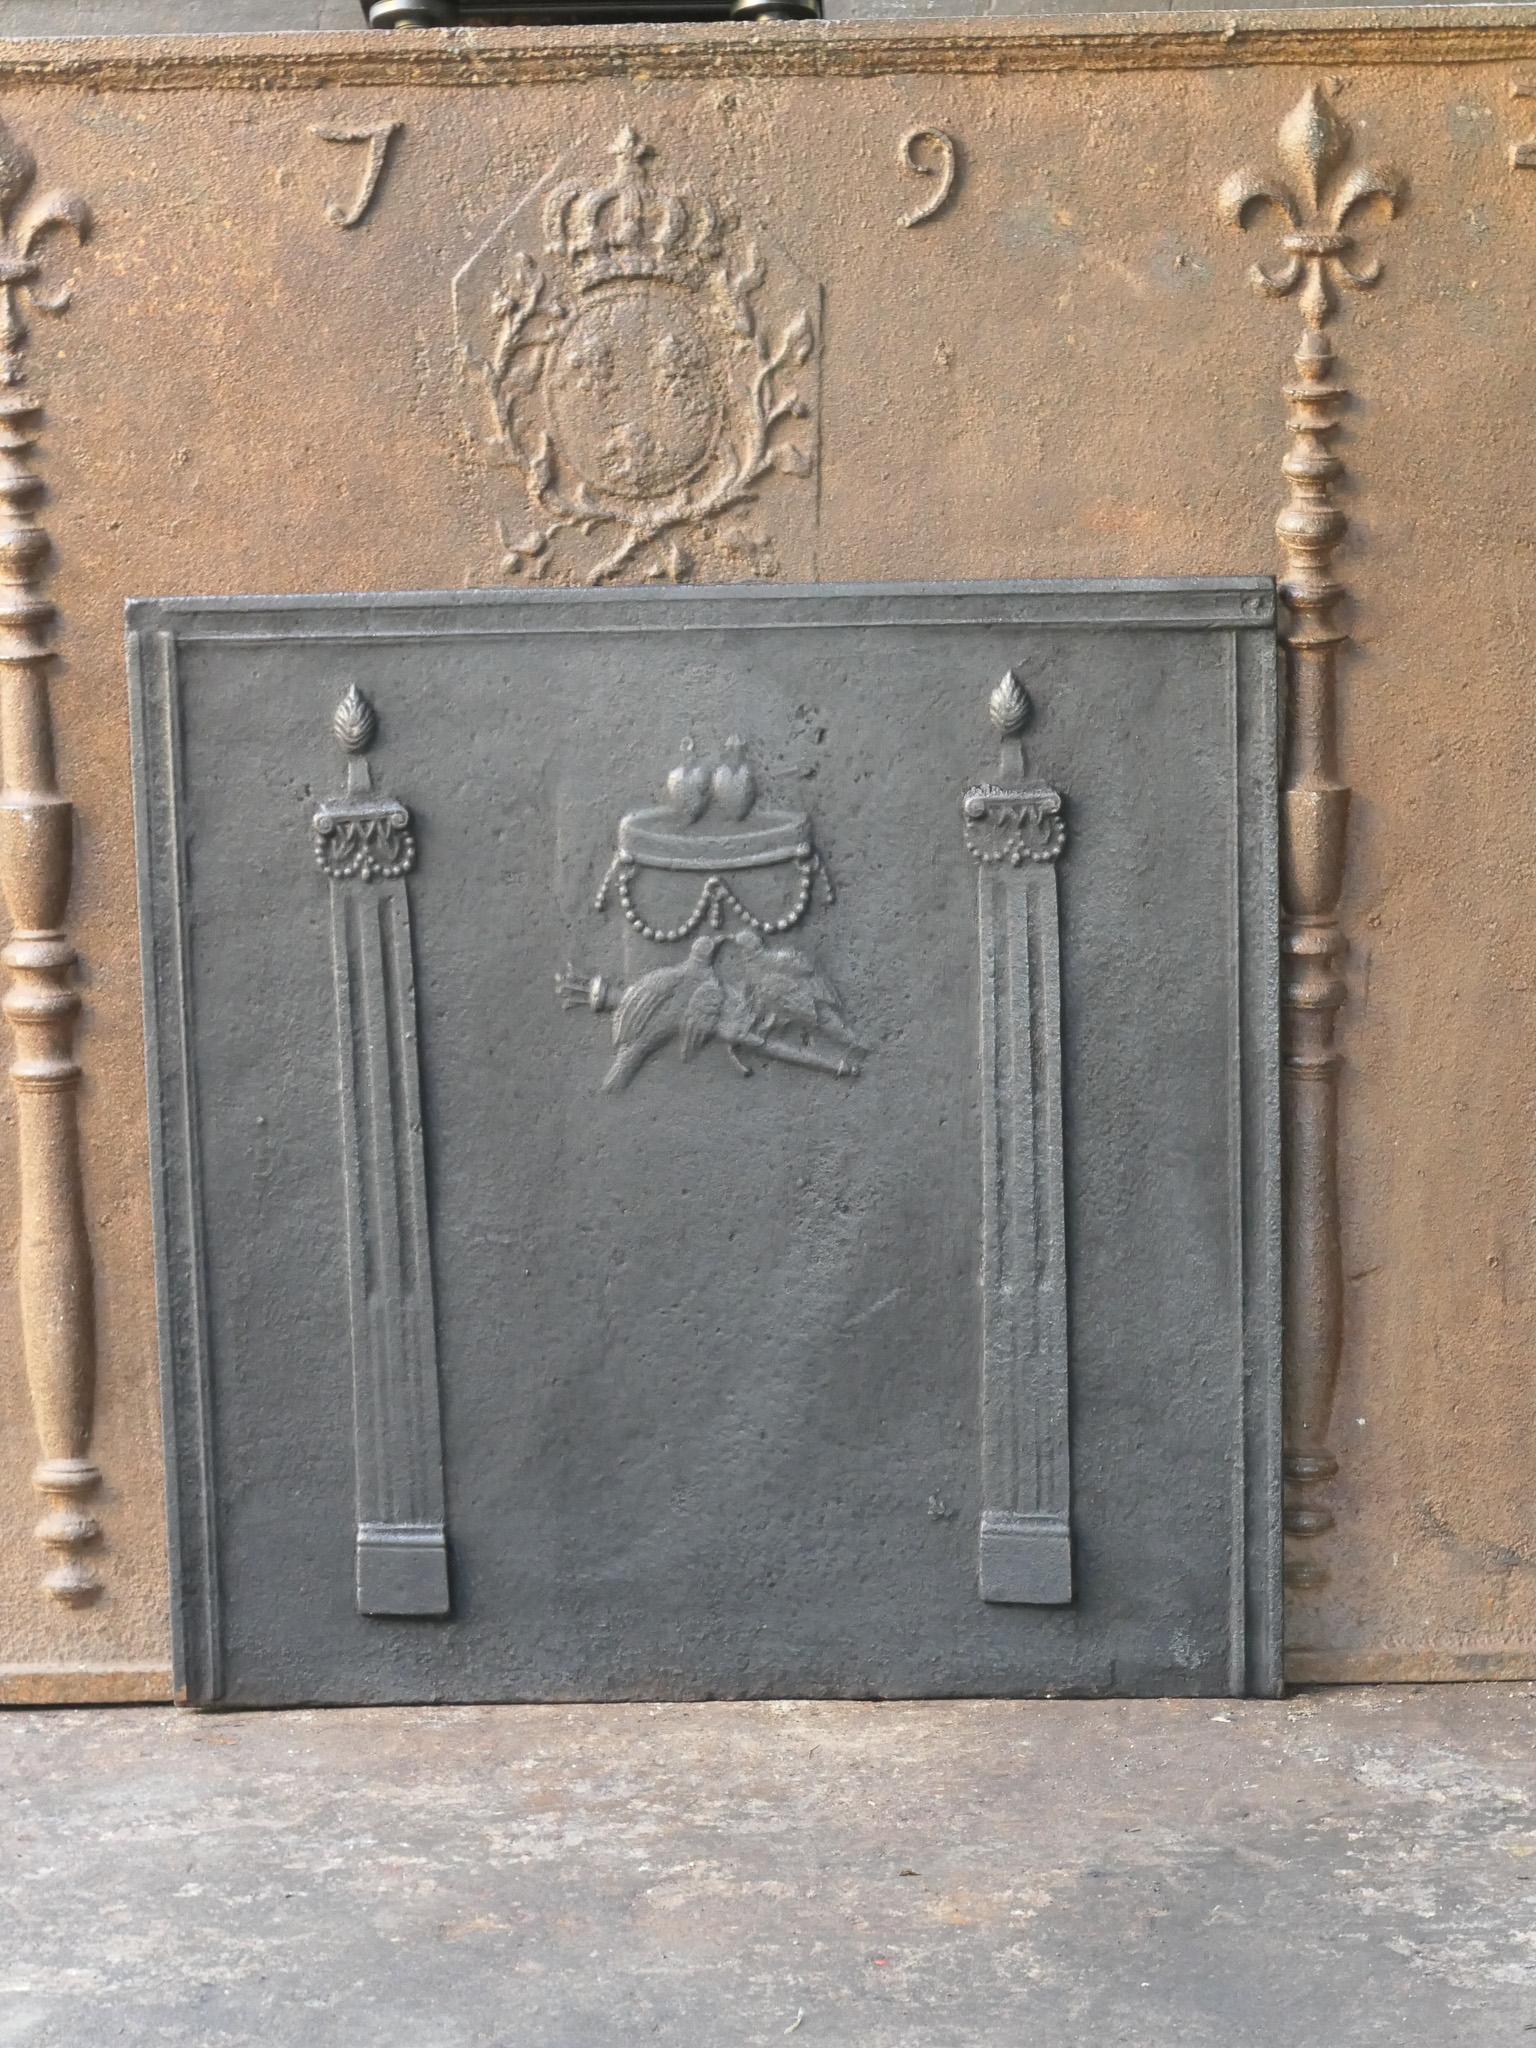 18th-19th century French Neoclassical fireback with the pillars of freedom and a decoration depicting an allegory of love. 

The fireback is made of cast iron and has a black / pewter patina. The fireback is in a good condition and does not have